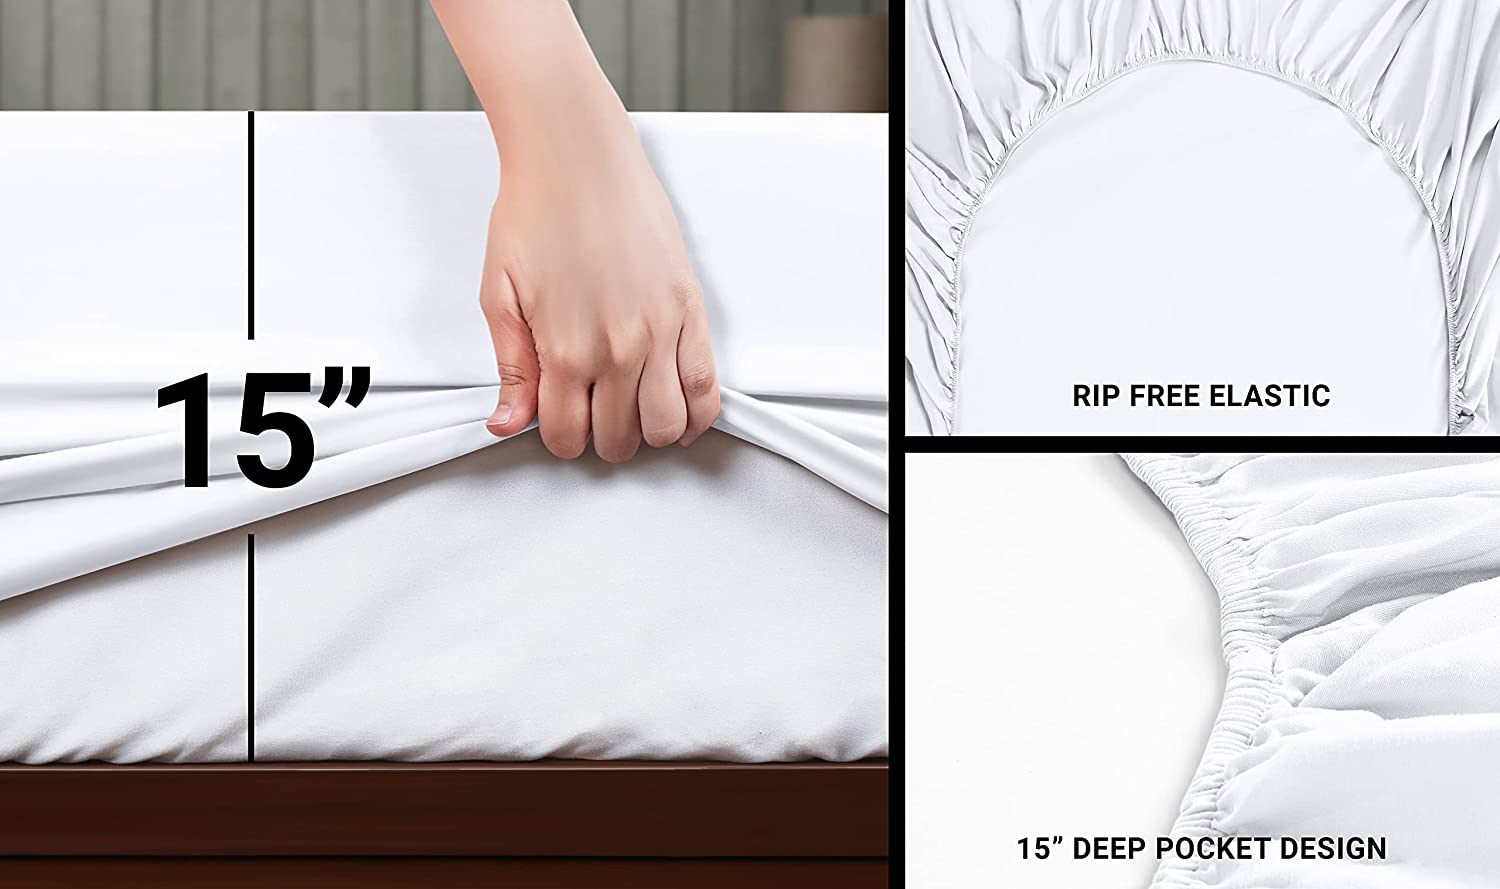 Utopia Bedding Bed Sheet Set - 3 Piece (Multiple Colors And Sizes) -  Rollaway Beds Shipped Within 24 Hours